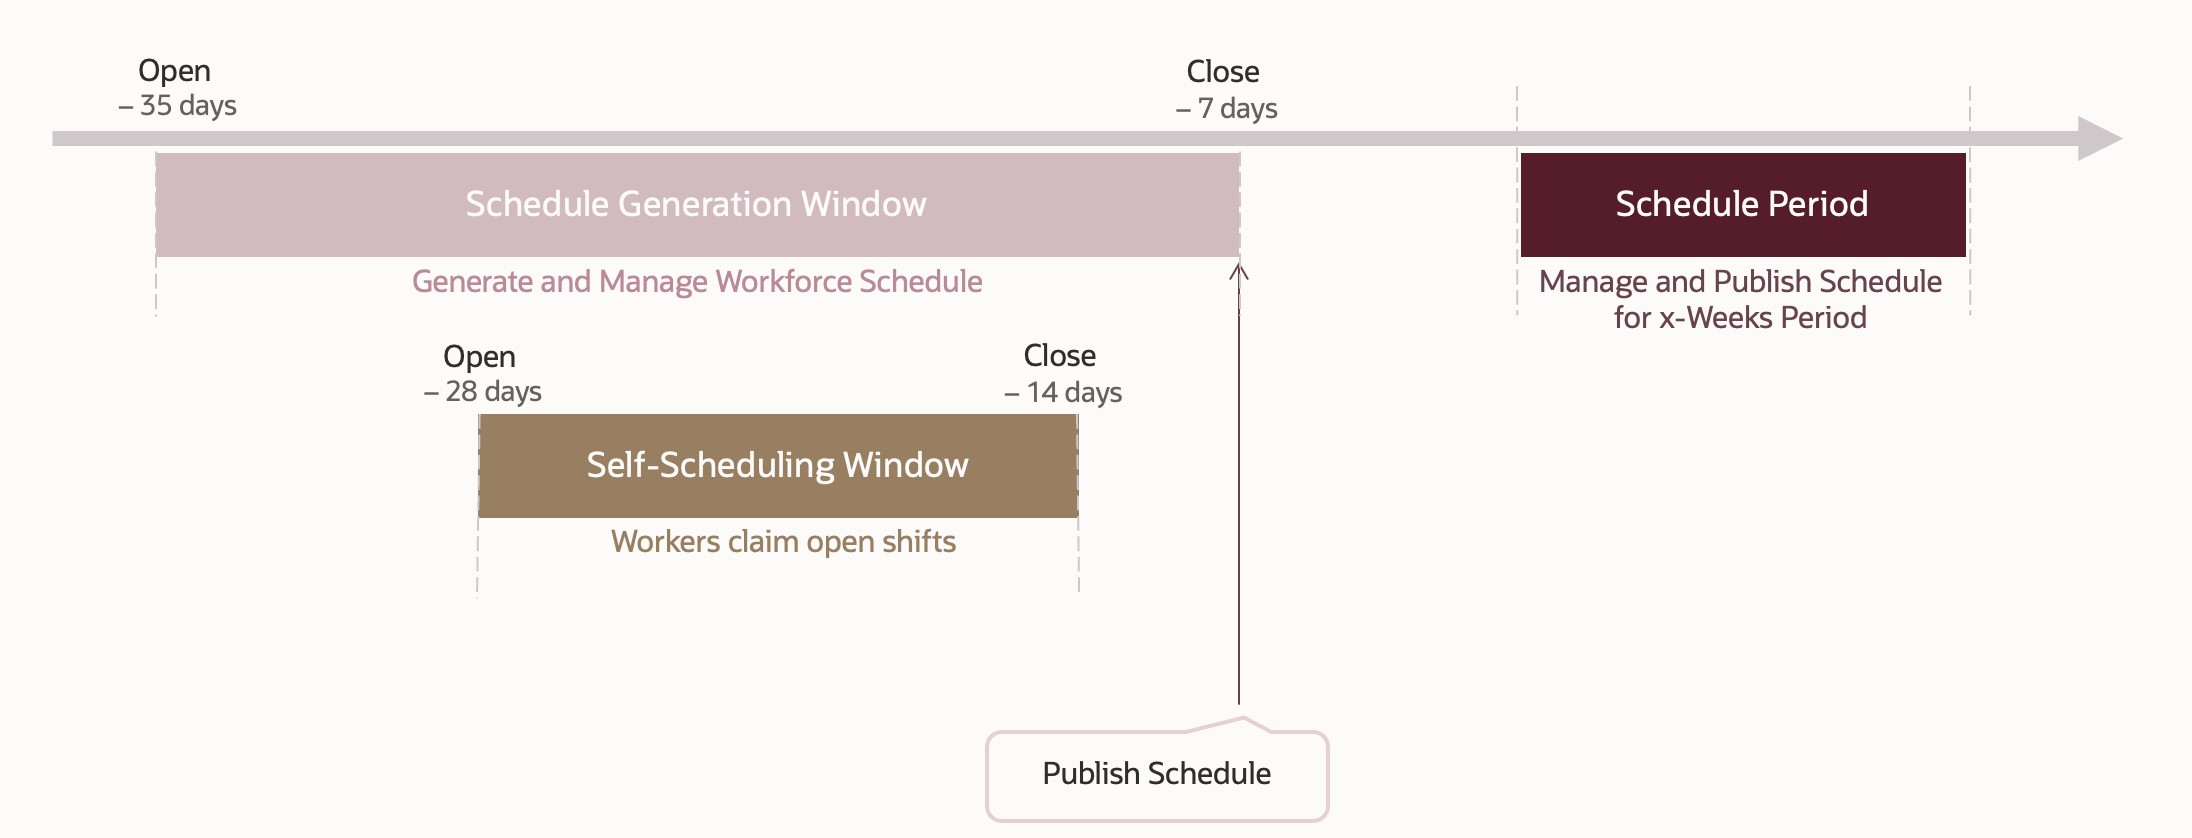 Time line showing the schedule generation window, self-scheduling window, when to publish the schedule, and the corresponding schedule period.